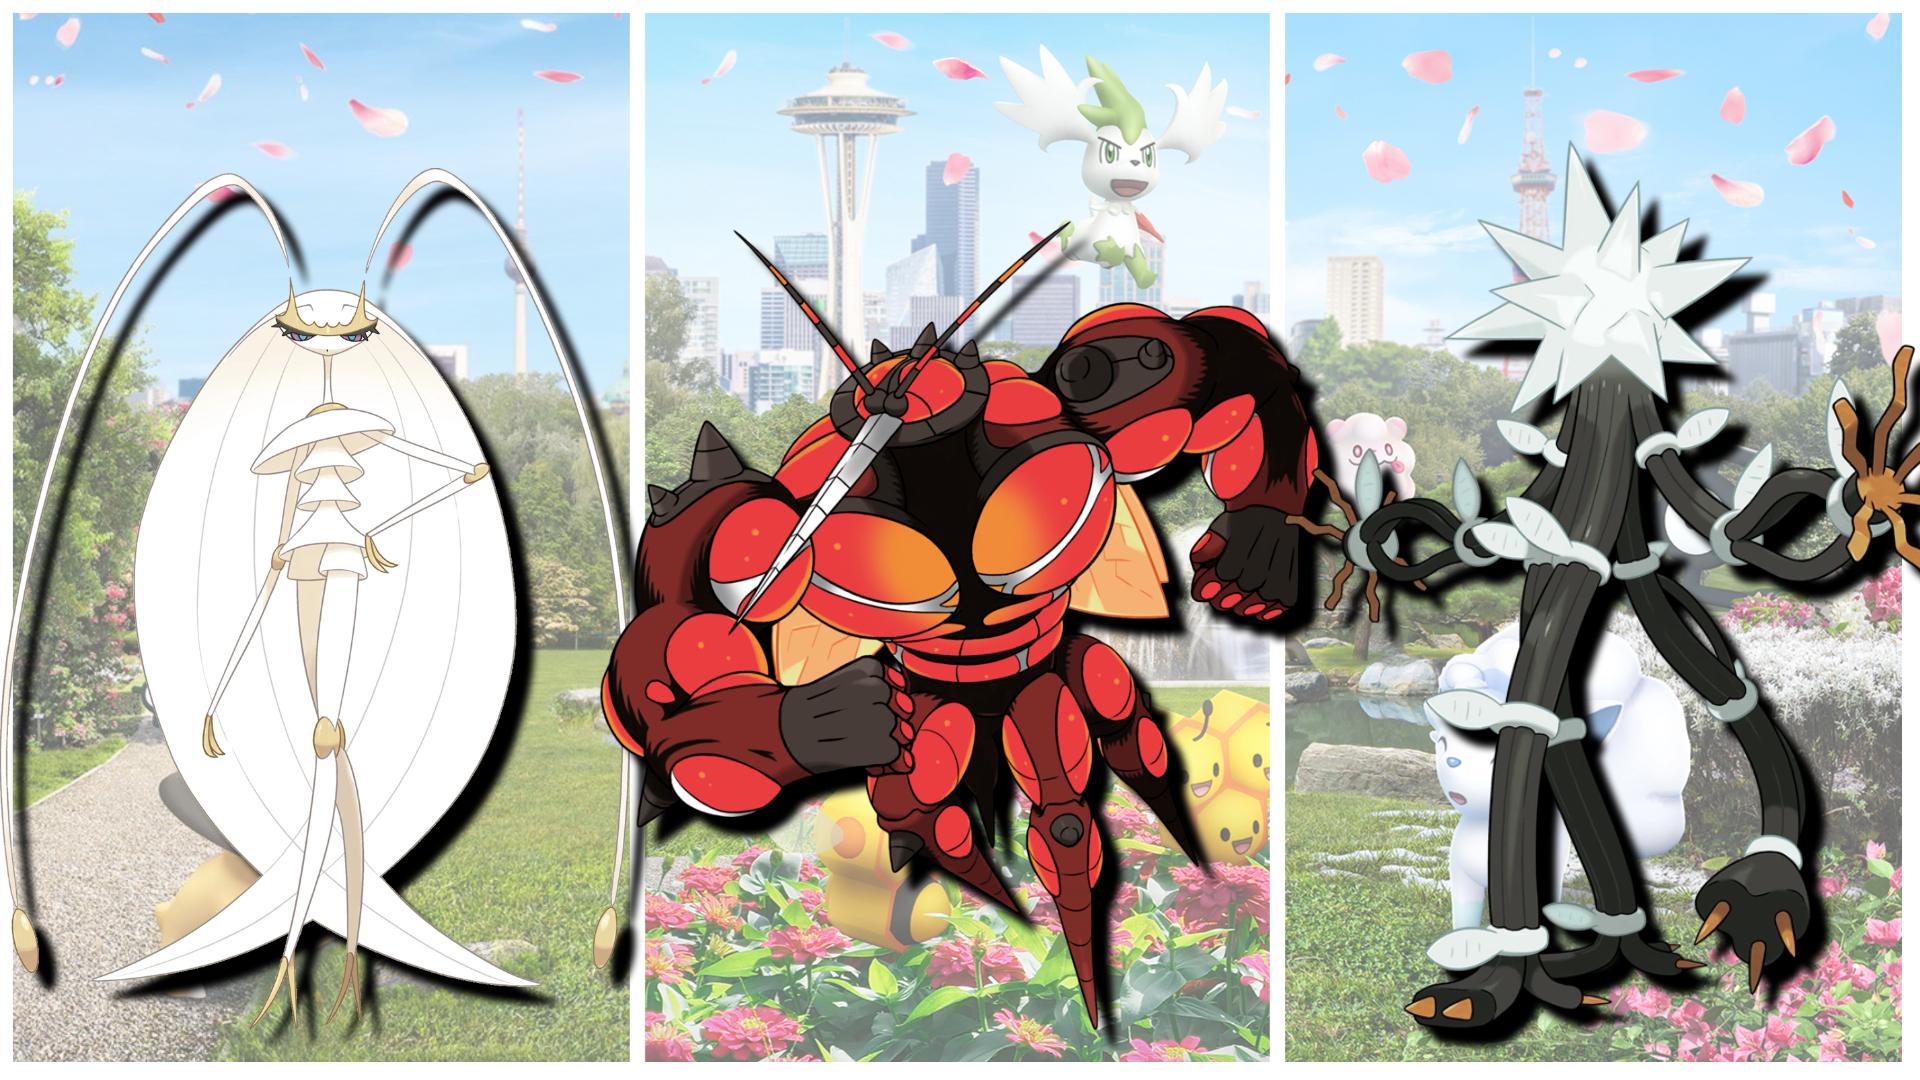 Serebii.net on X: Serebii Update: Ultra Beasts will be available in  Pokémon GO during Pokémon GO Fest's live events as part of Special  Research: Berlin - Pheromosa Seattle - Buzzwole Sapporo 